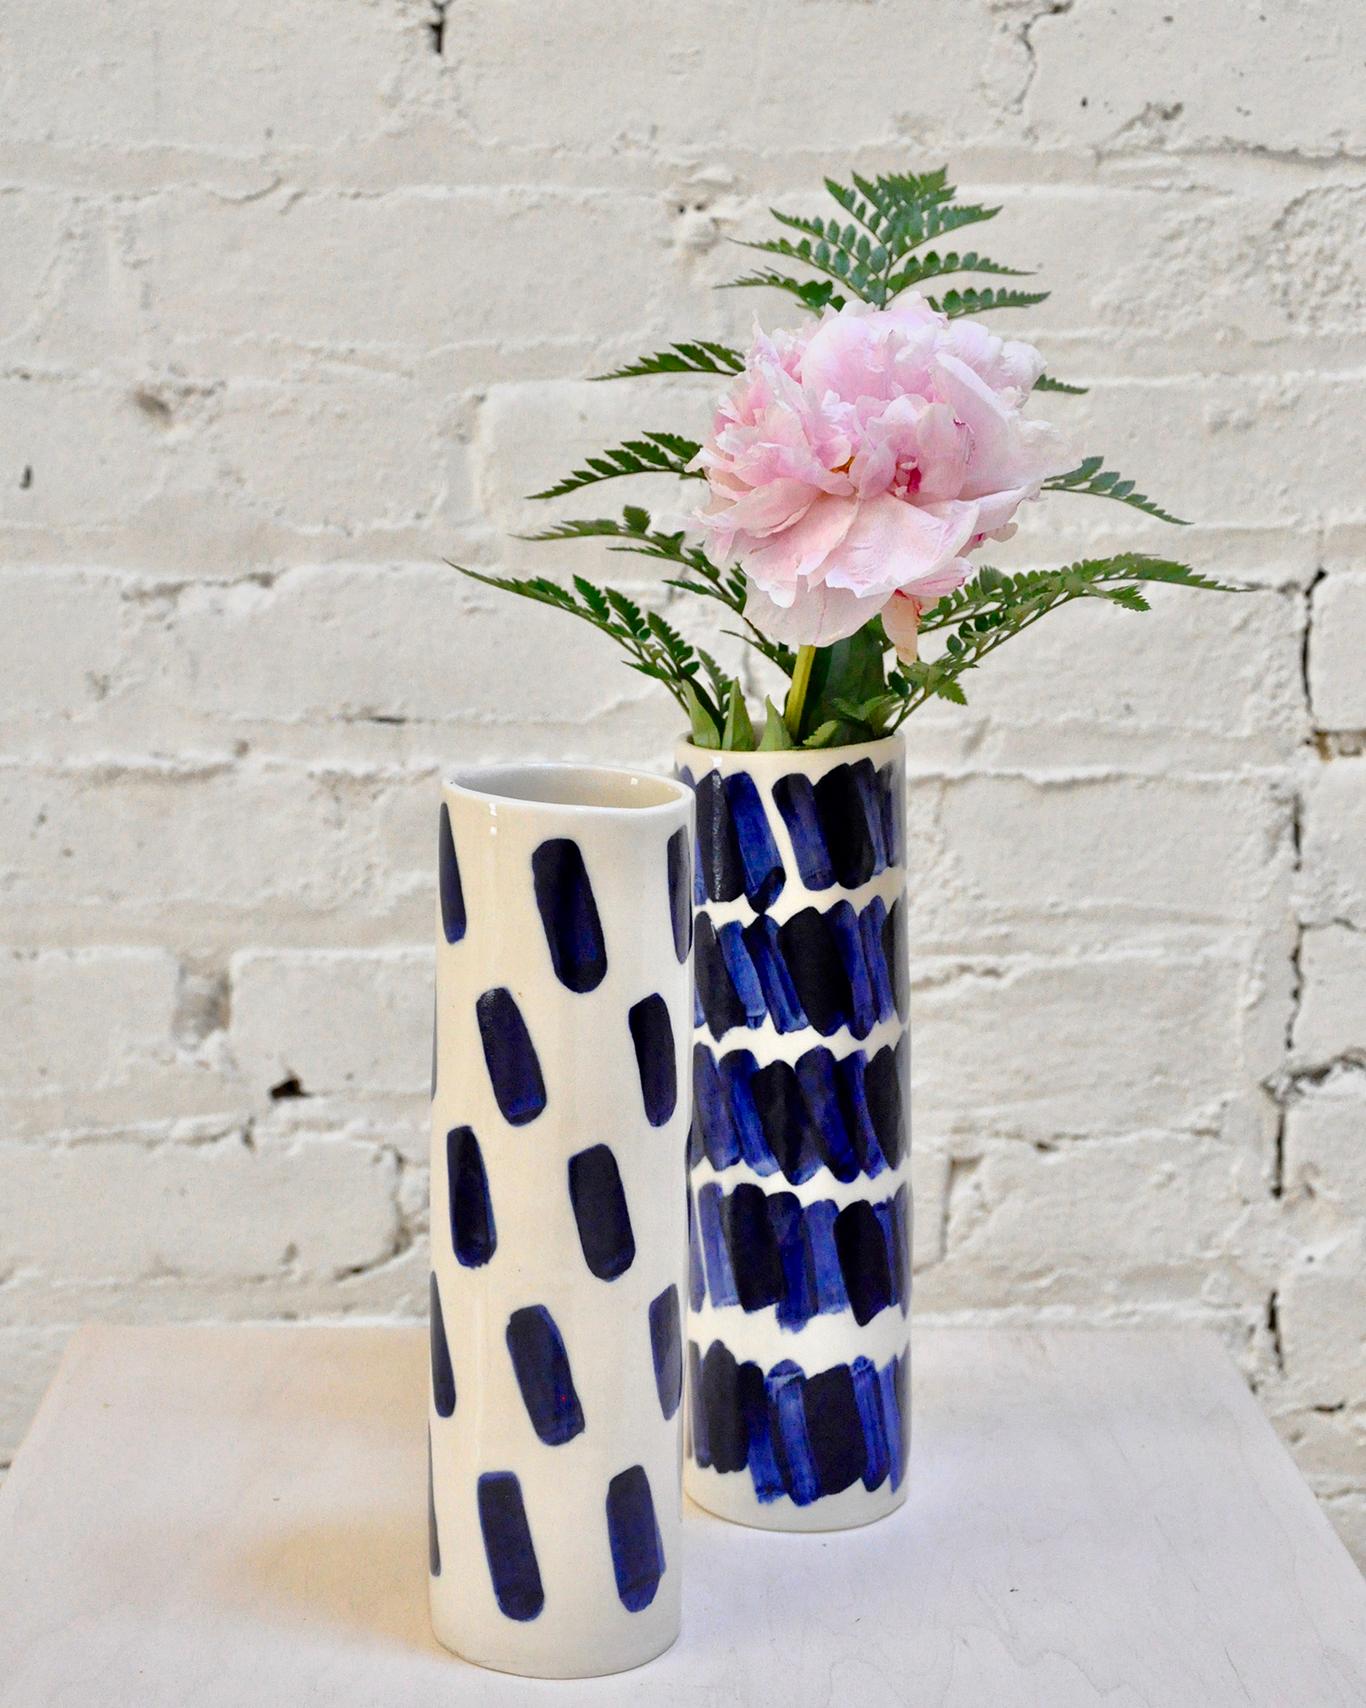 Modern Pair of Rhythm Vases by Isabel Halley, in White Porcelain with Cobalt Glaze